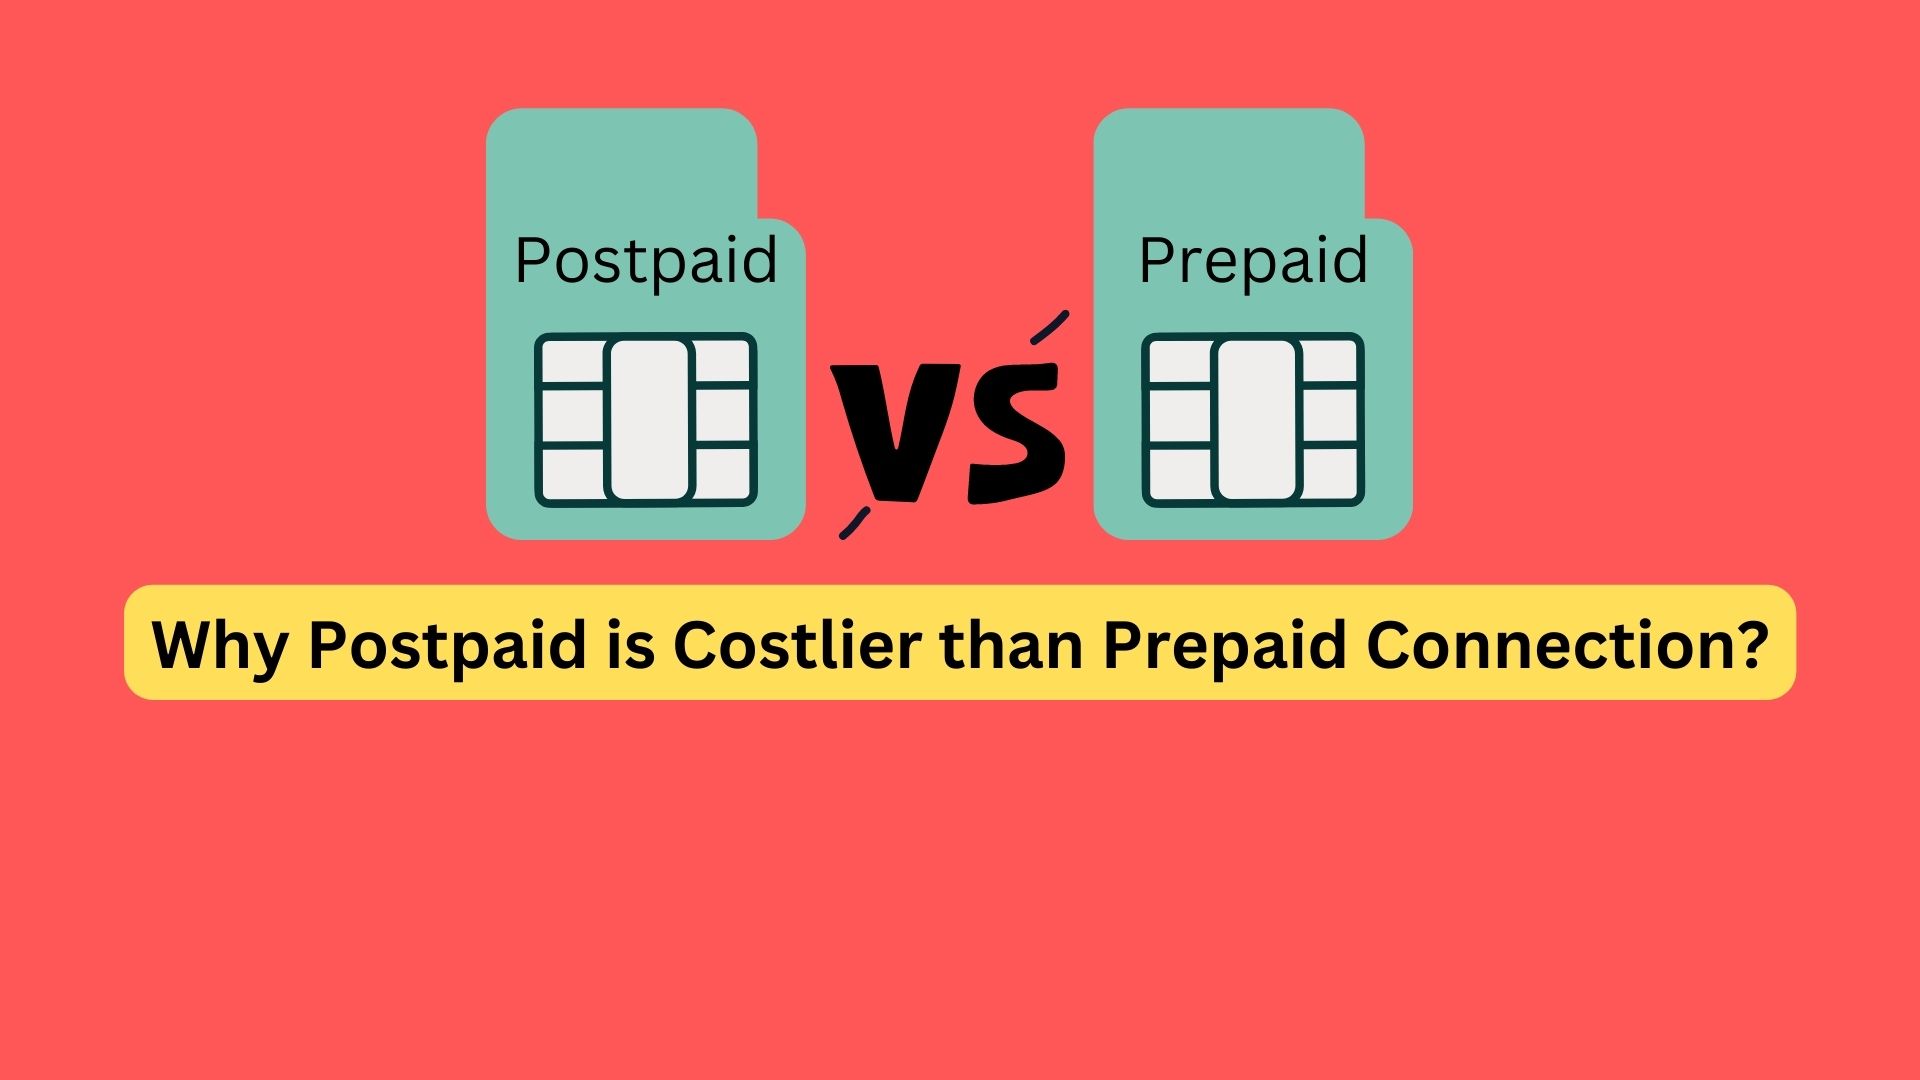 Why Postpaid is Costlier than Prepaid Connection